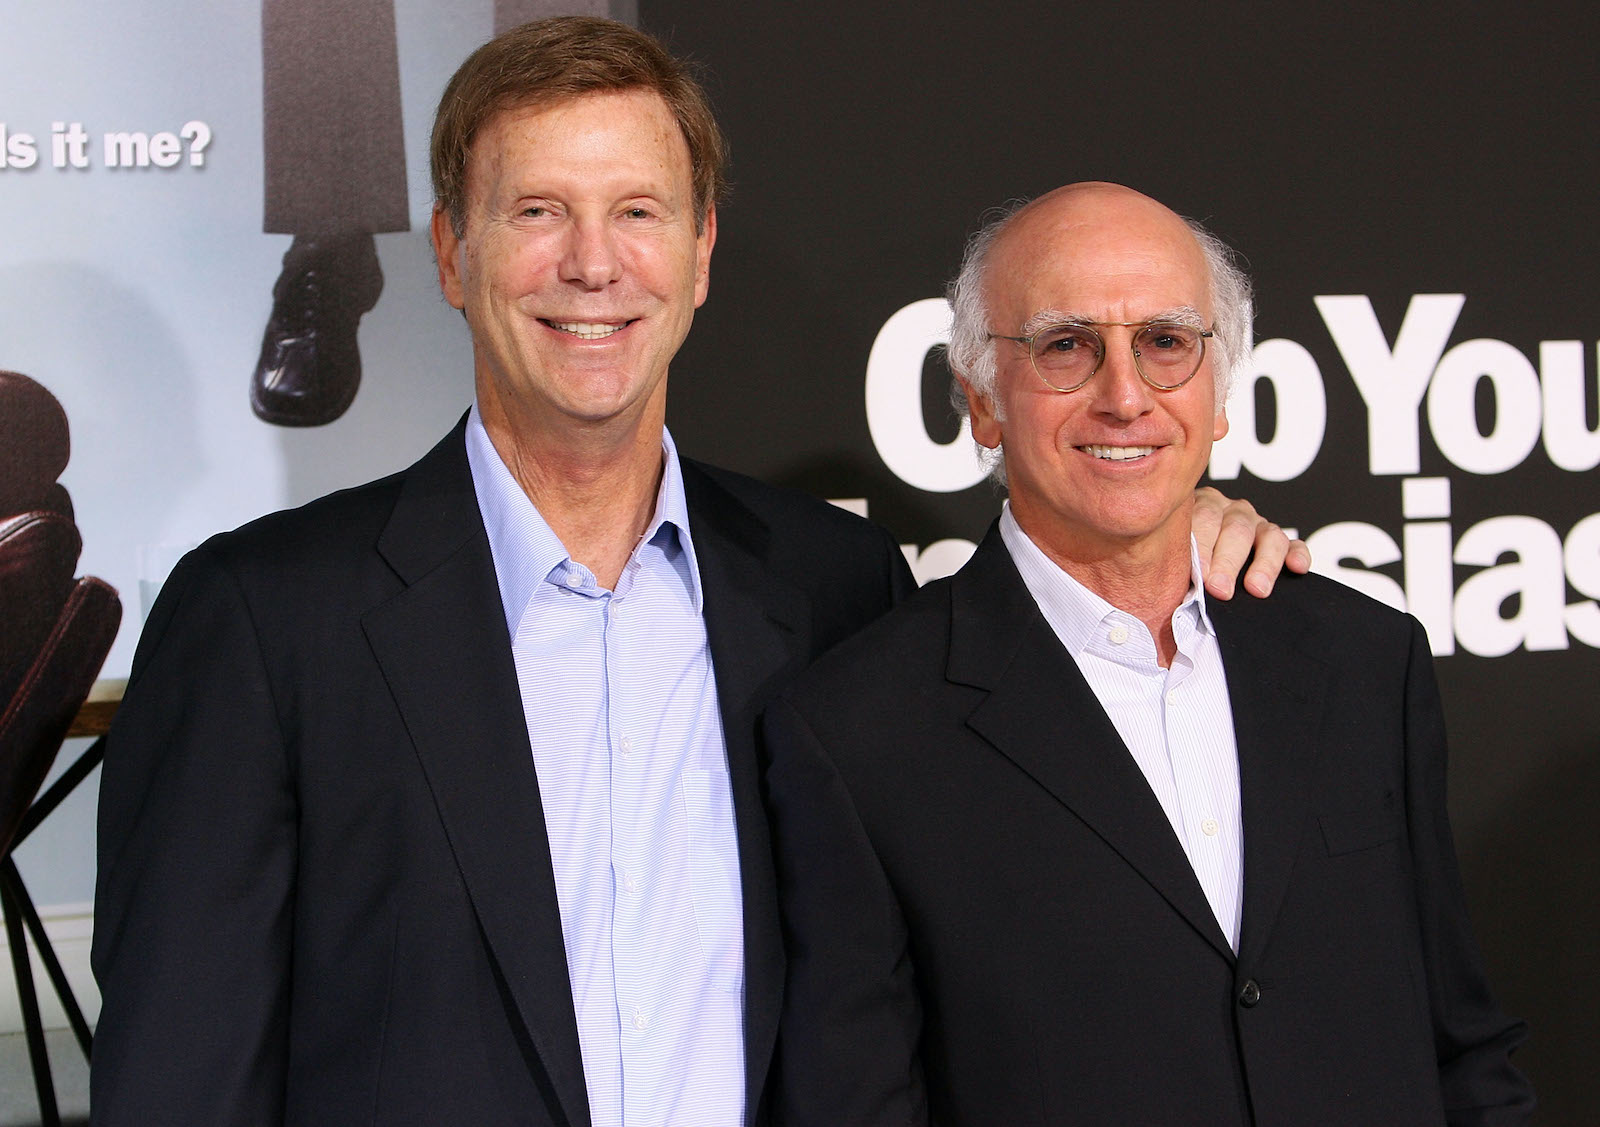 Albert Brooks joins Curb Your Enthusiasm as what seemed to be a small nod to his brother Bob Einstein